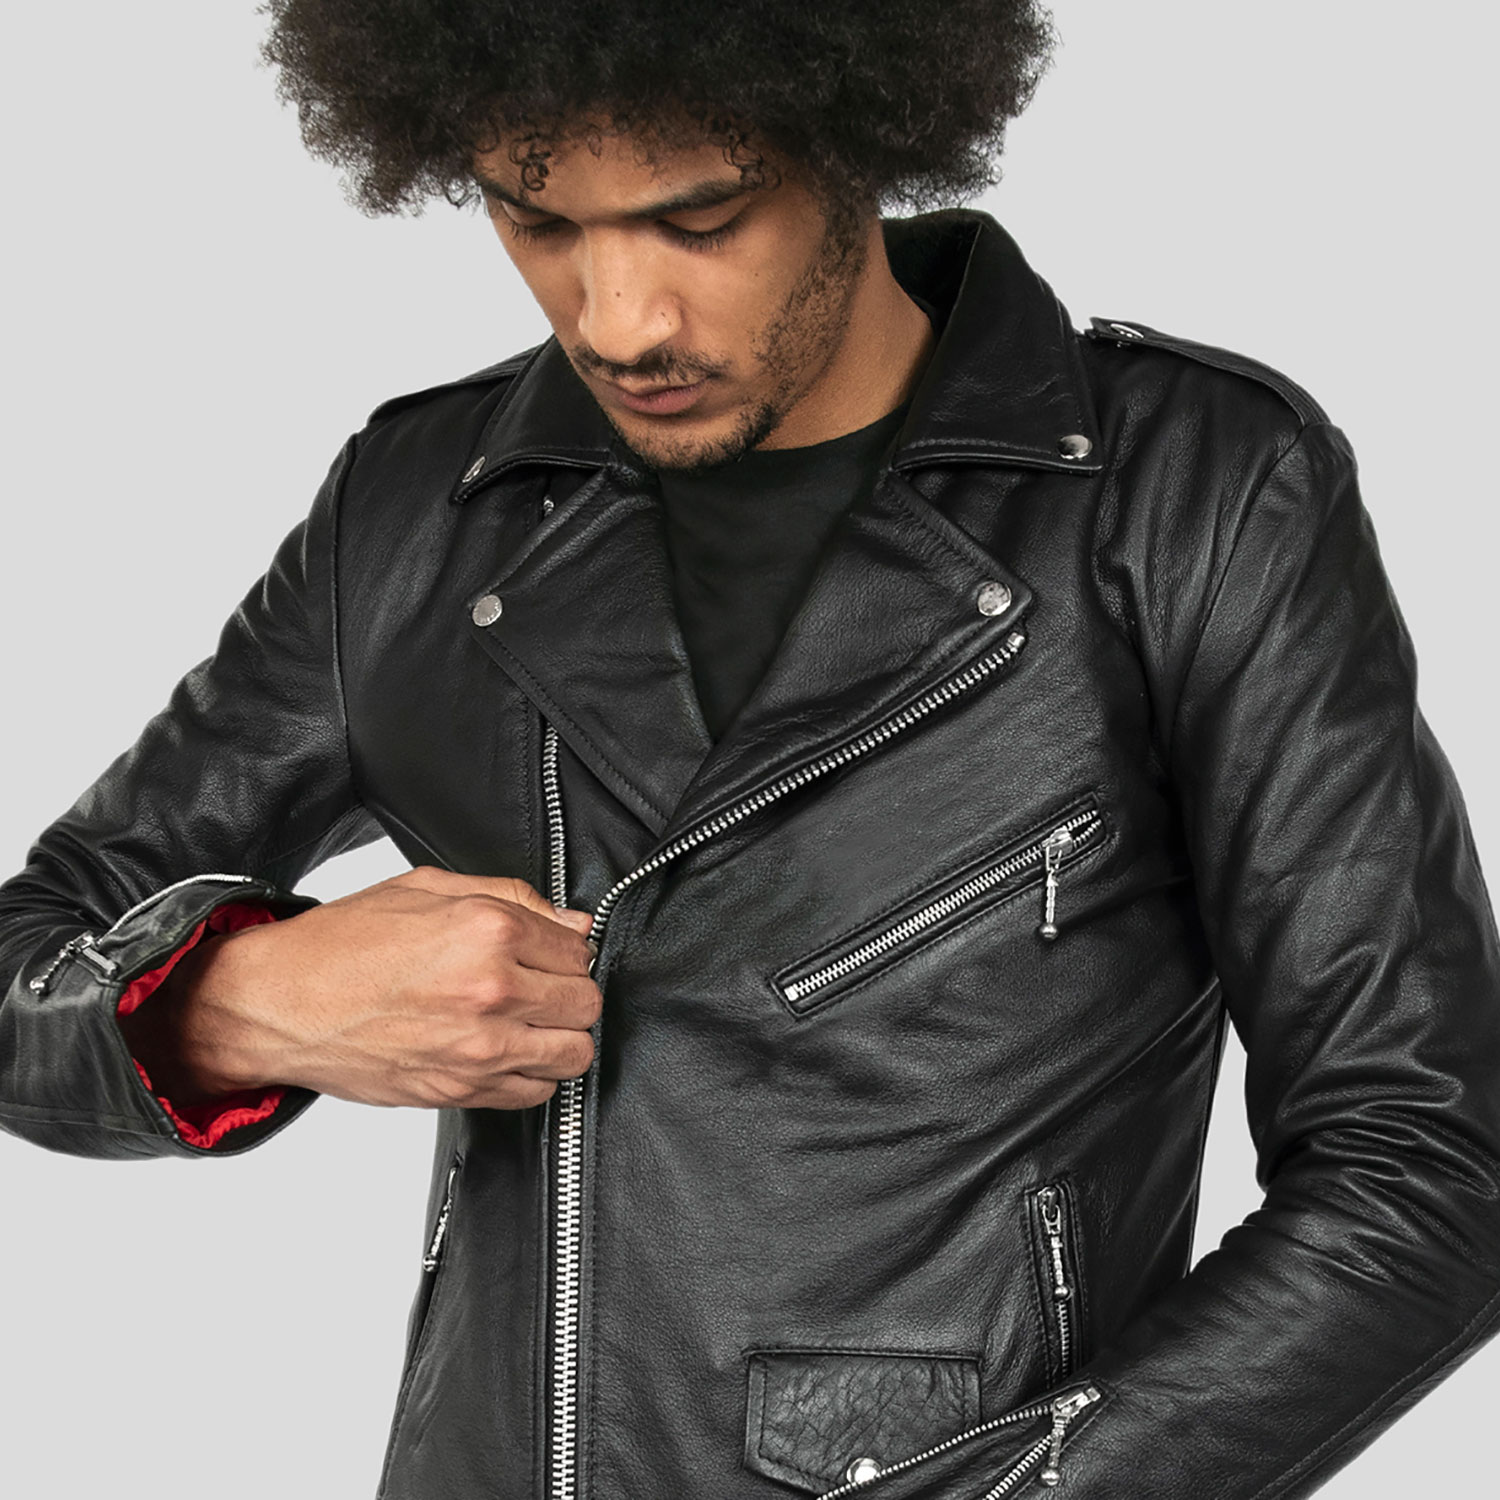 Commando Black Hell For Straight To and Men | Long Nickel Jacket - Leather Apparel - Tall